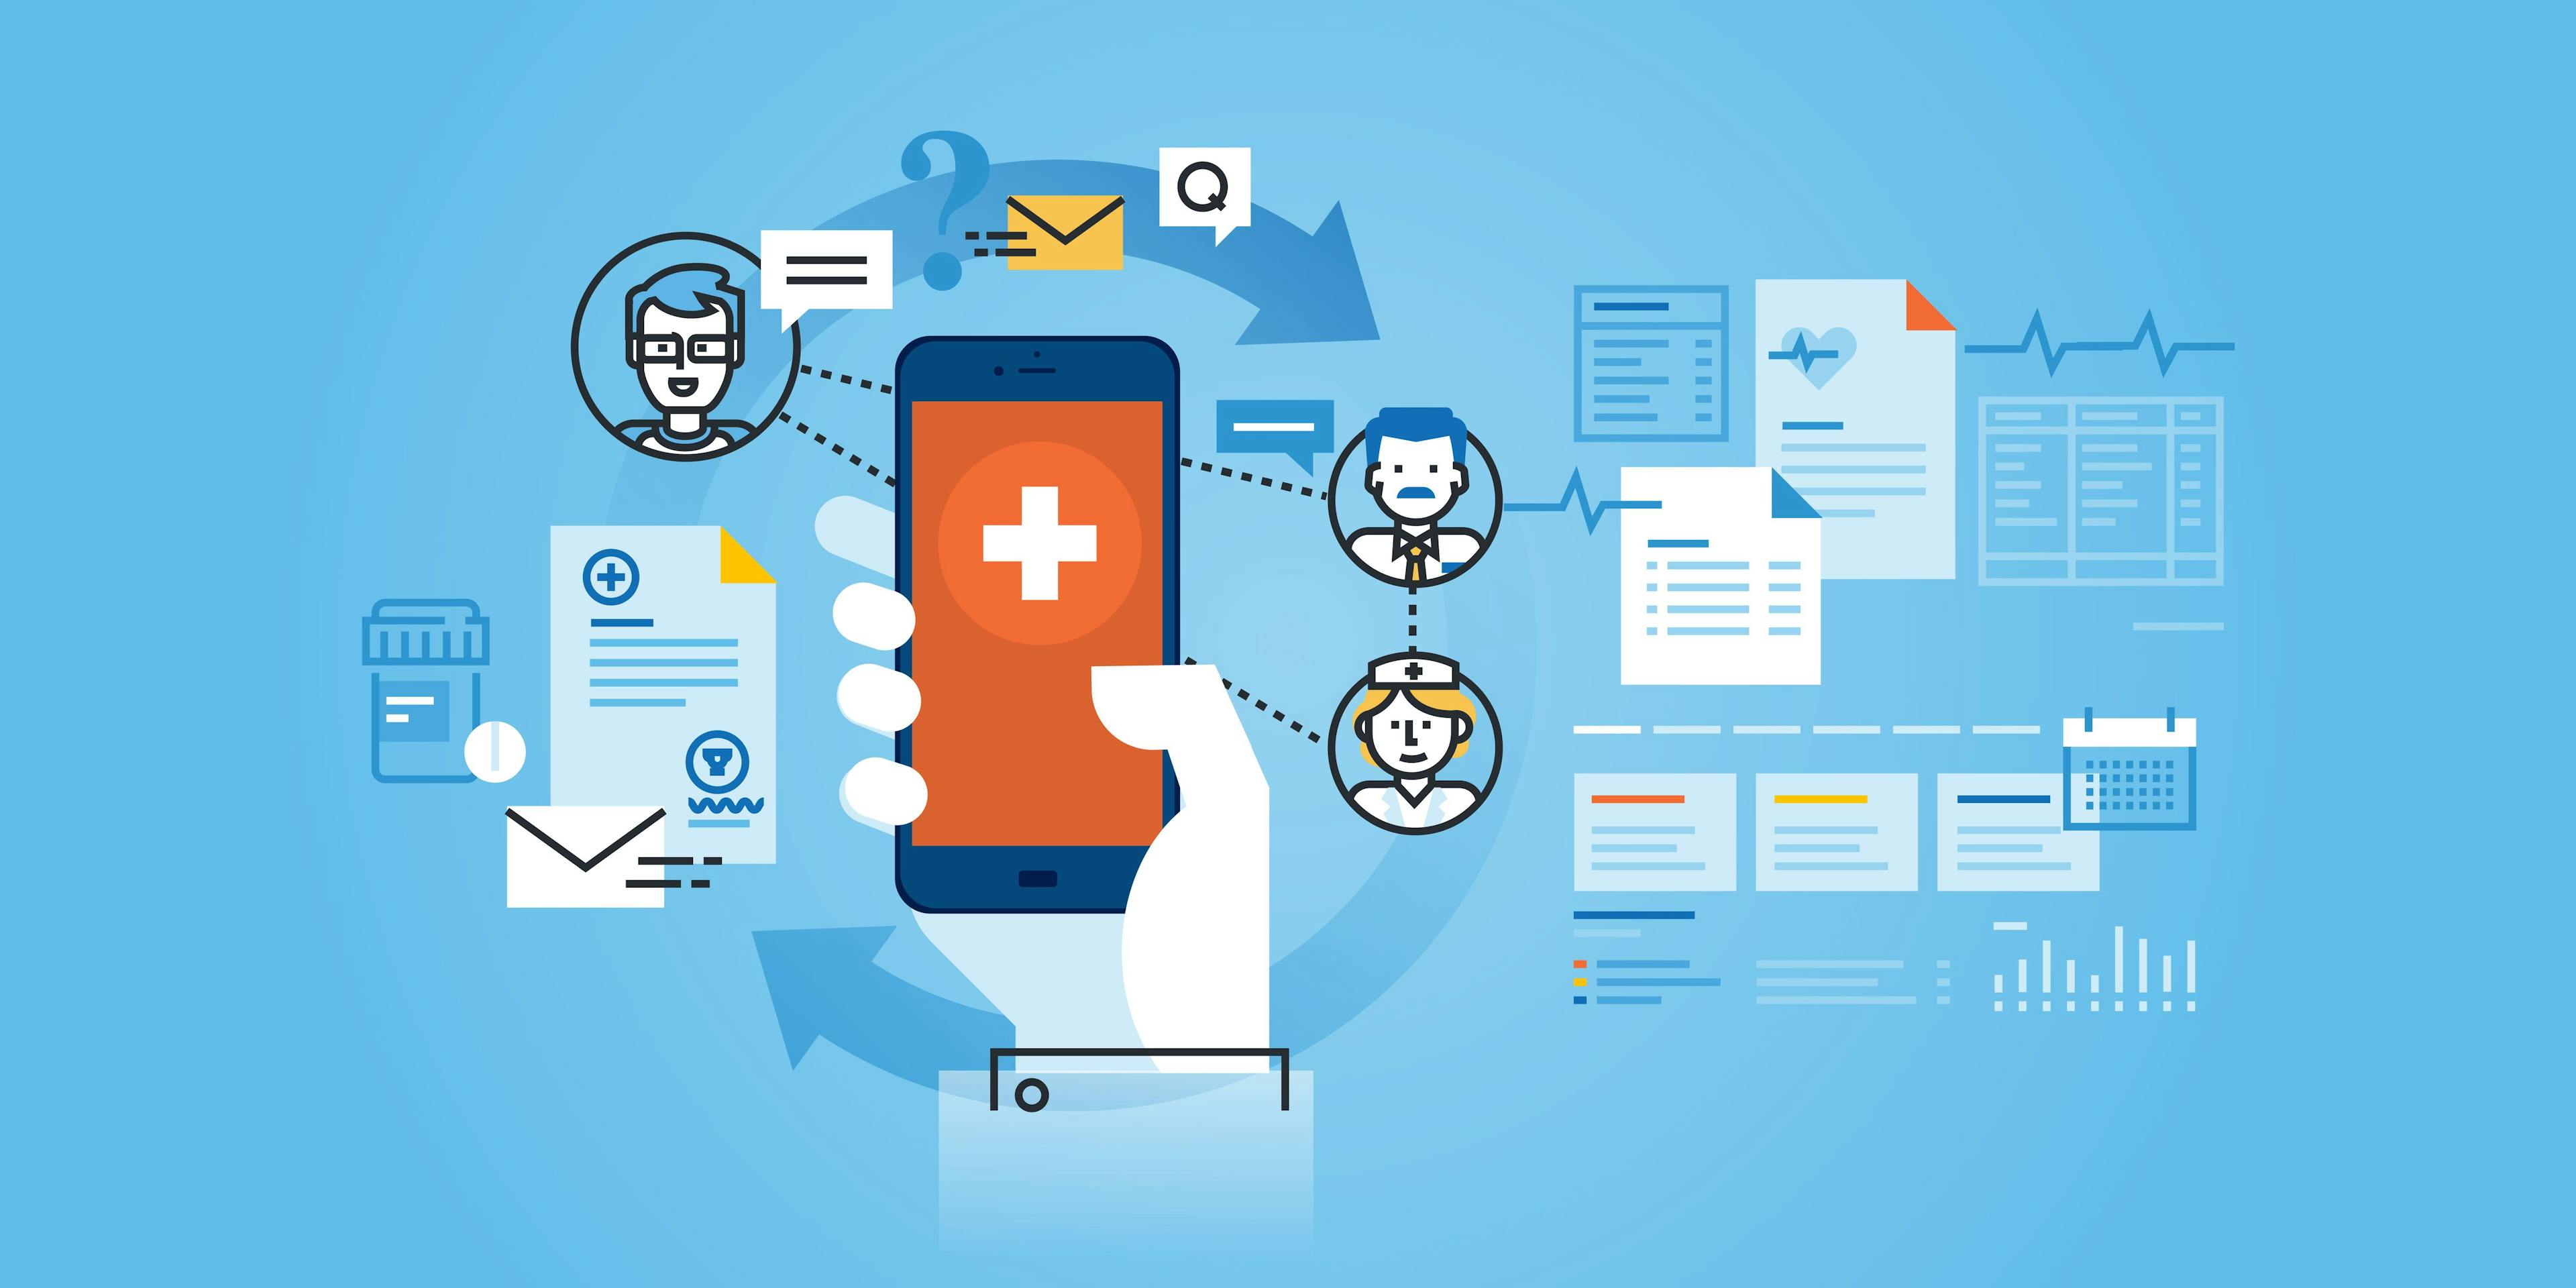 Telehealth: Policy suggestions going forward